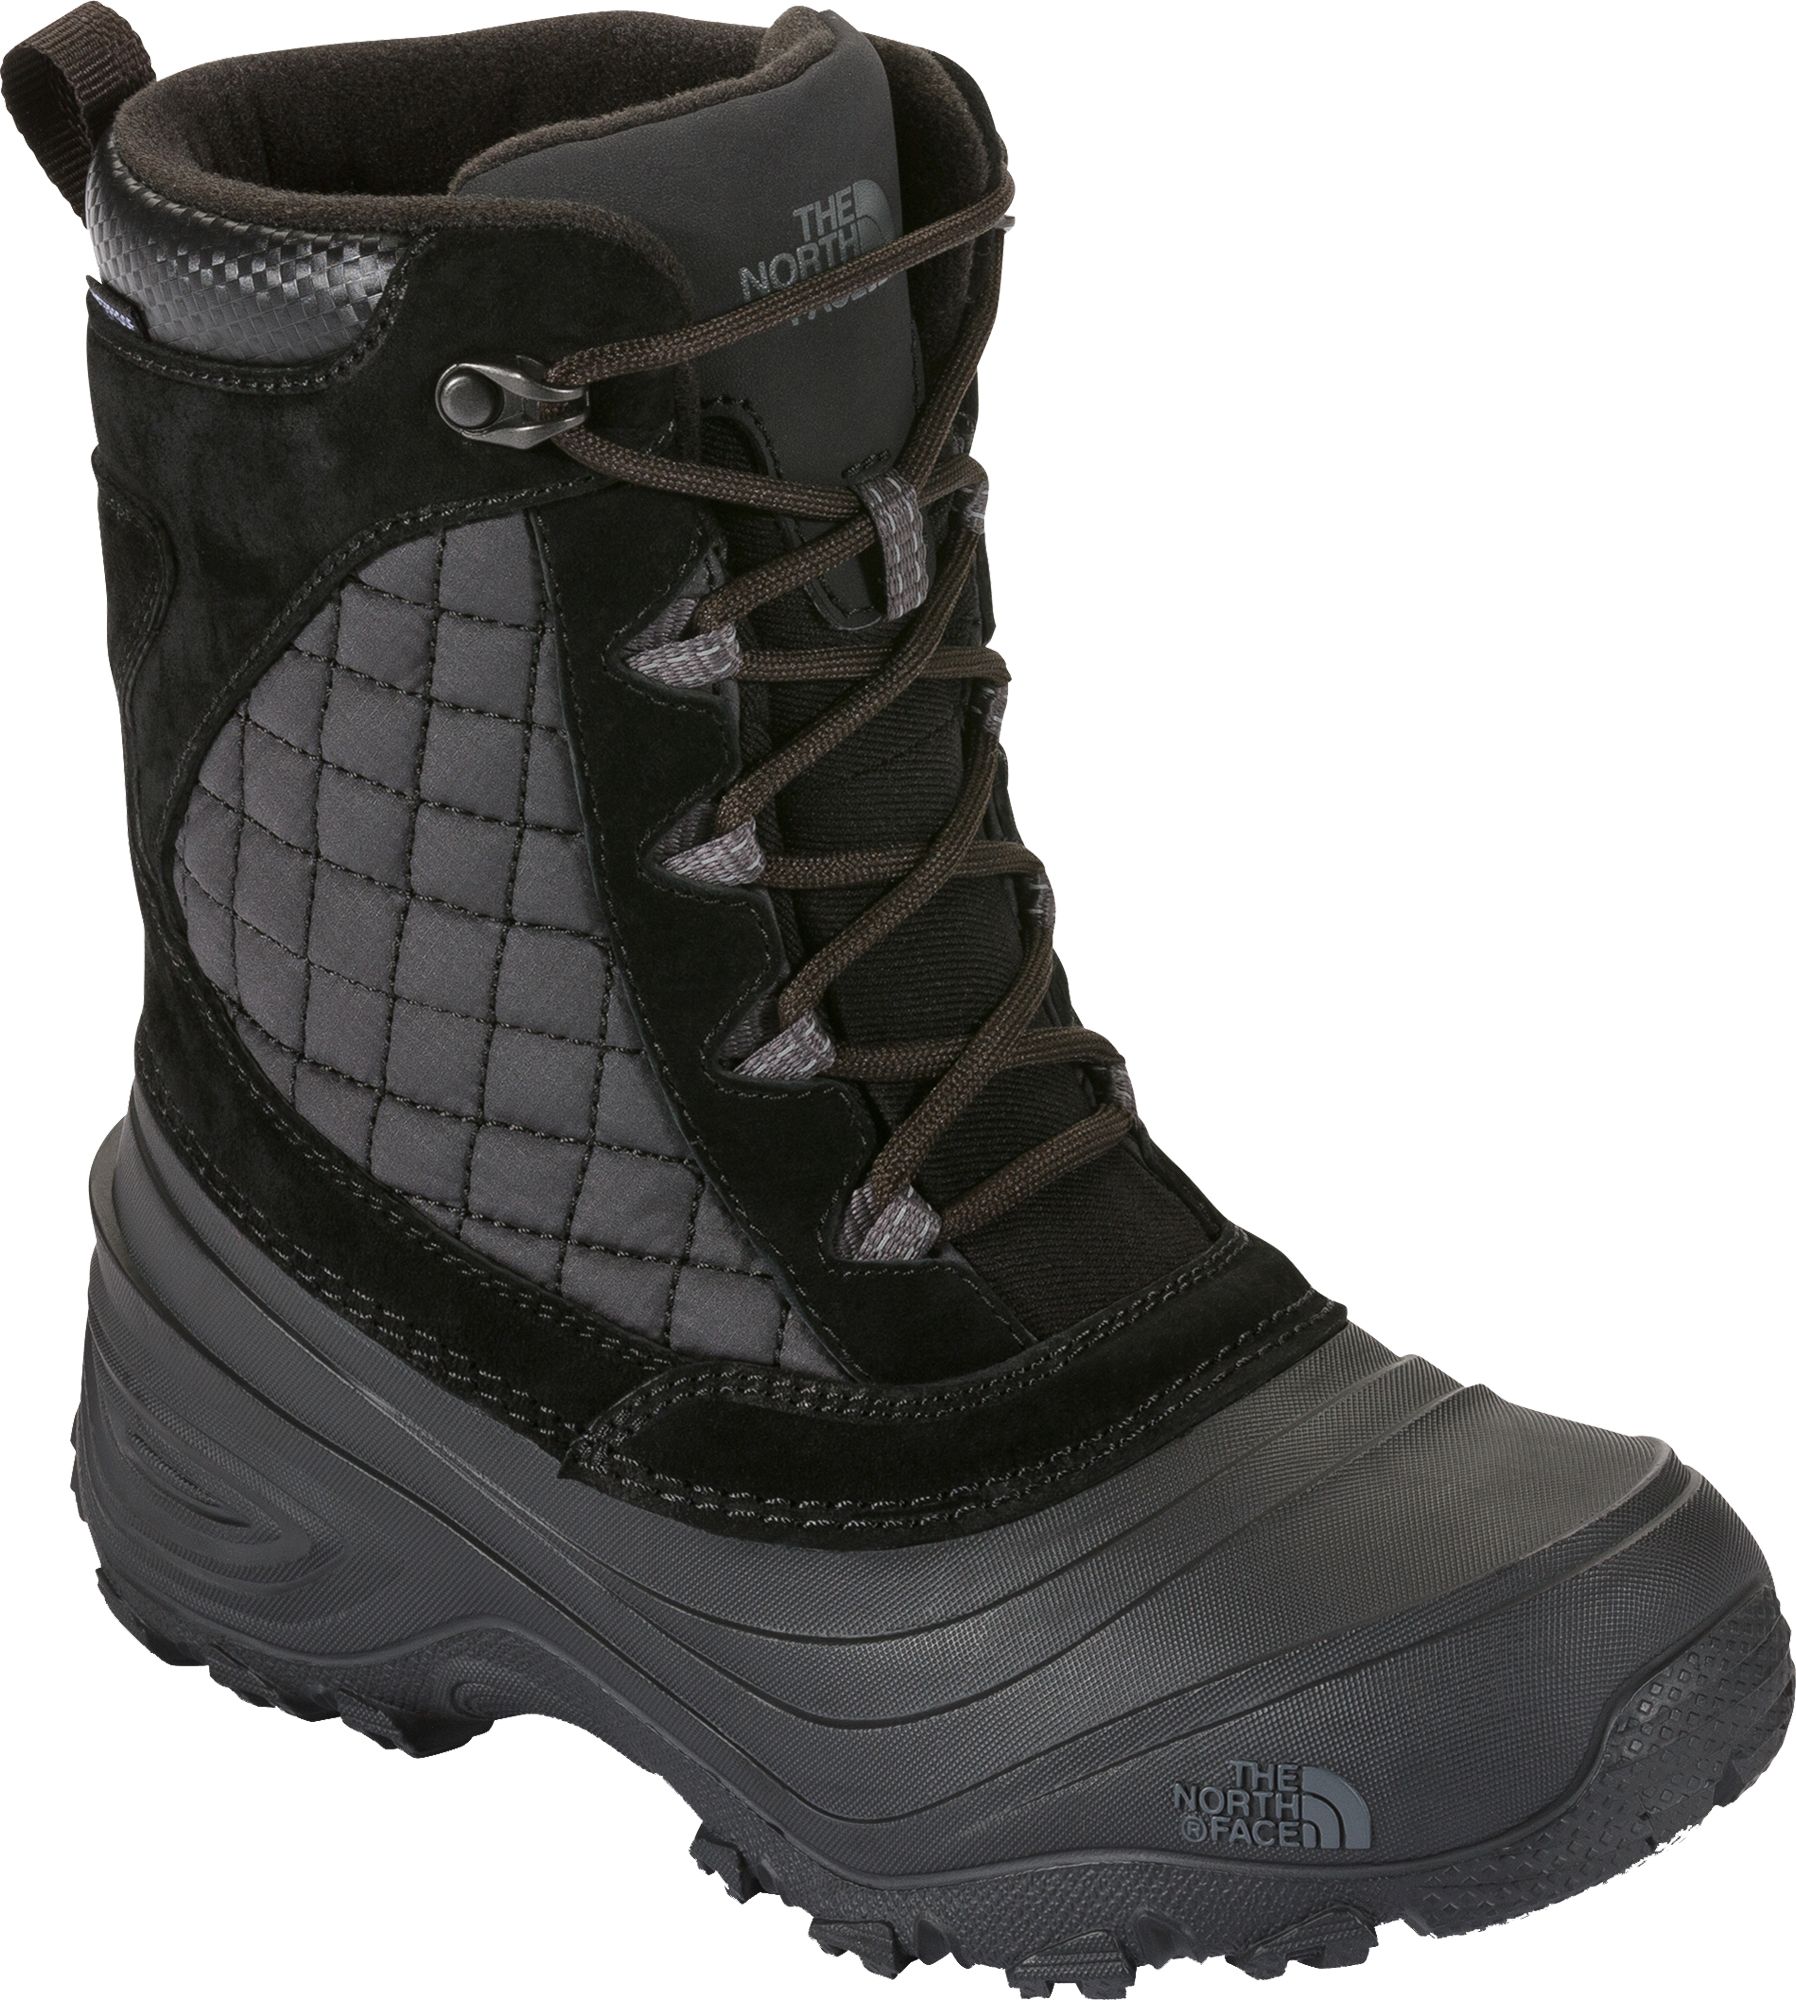 Youth Boots & Outdoor Footwear | DICK'S Sporting Goods